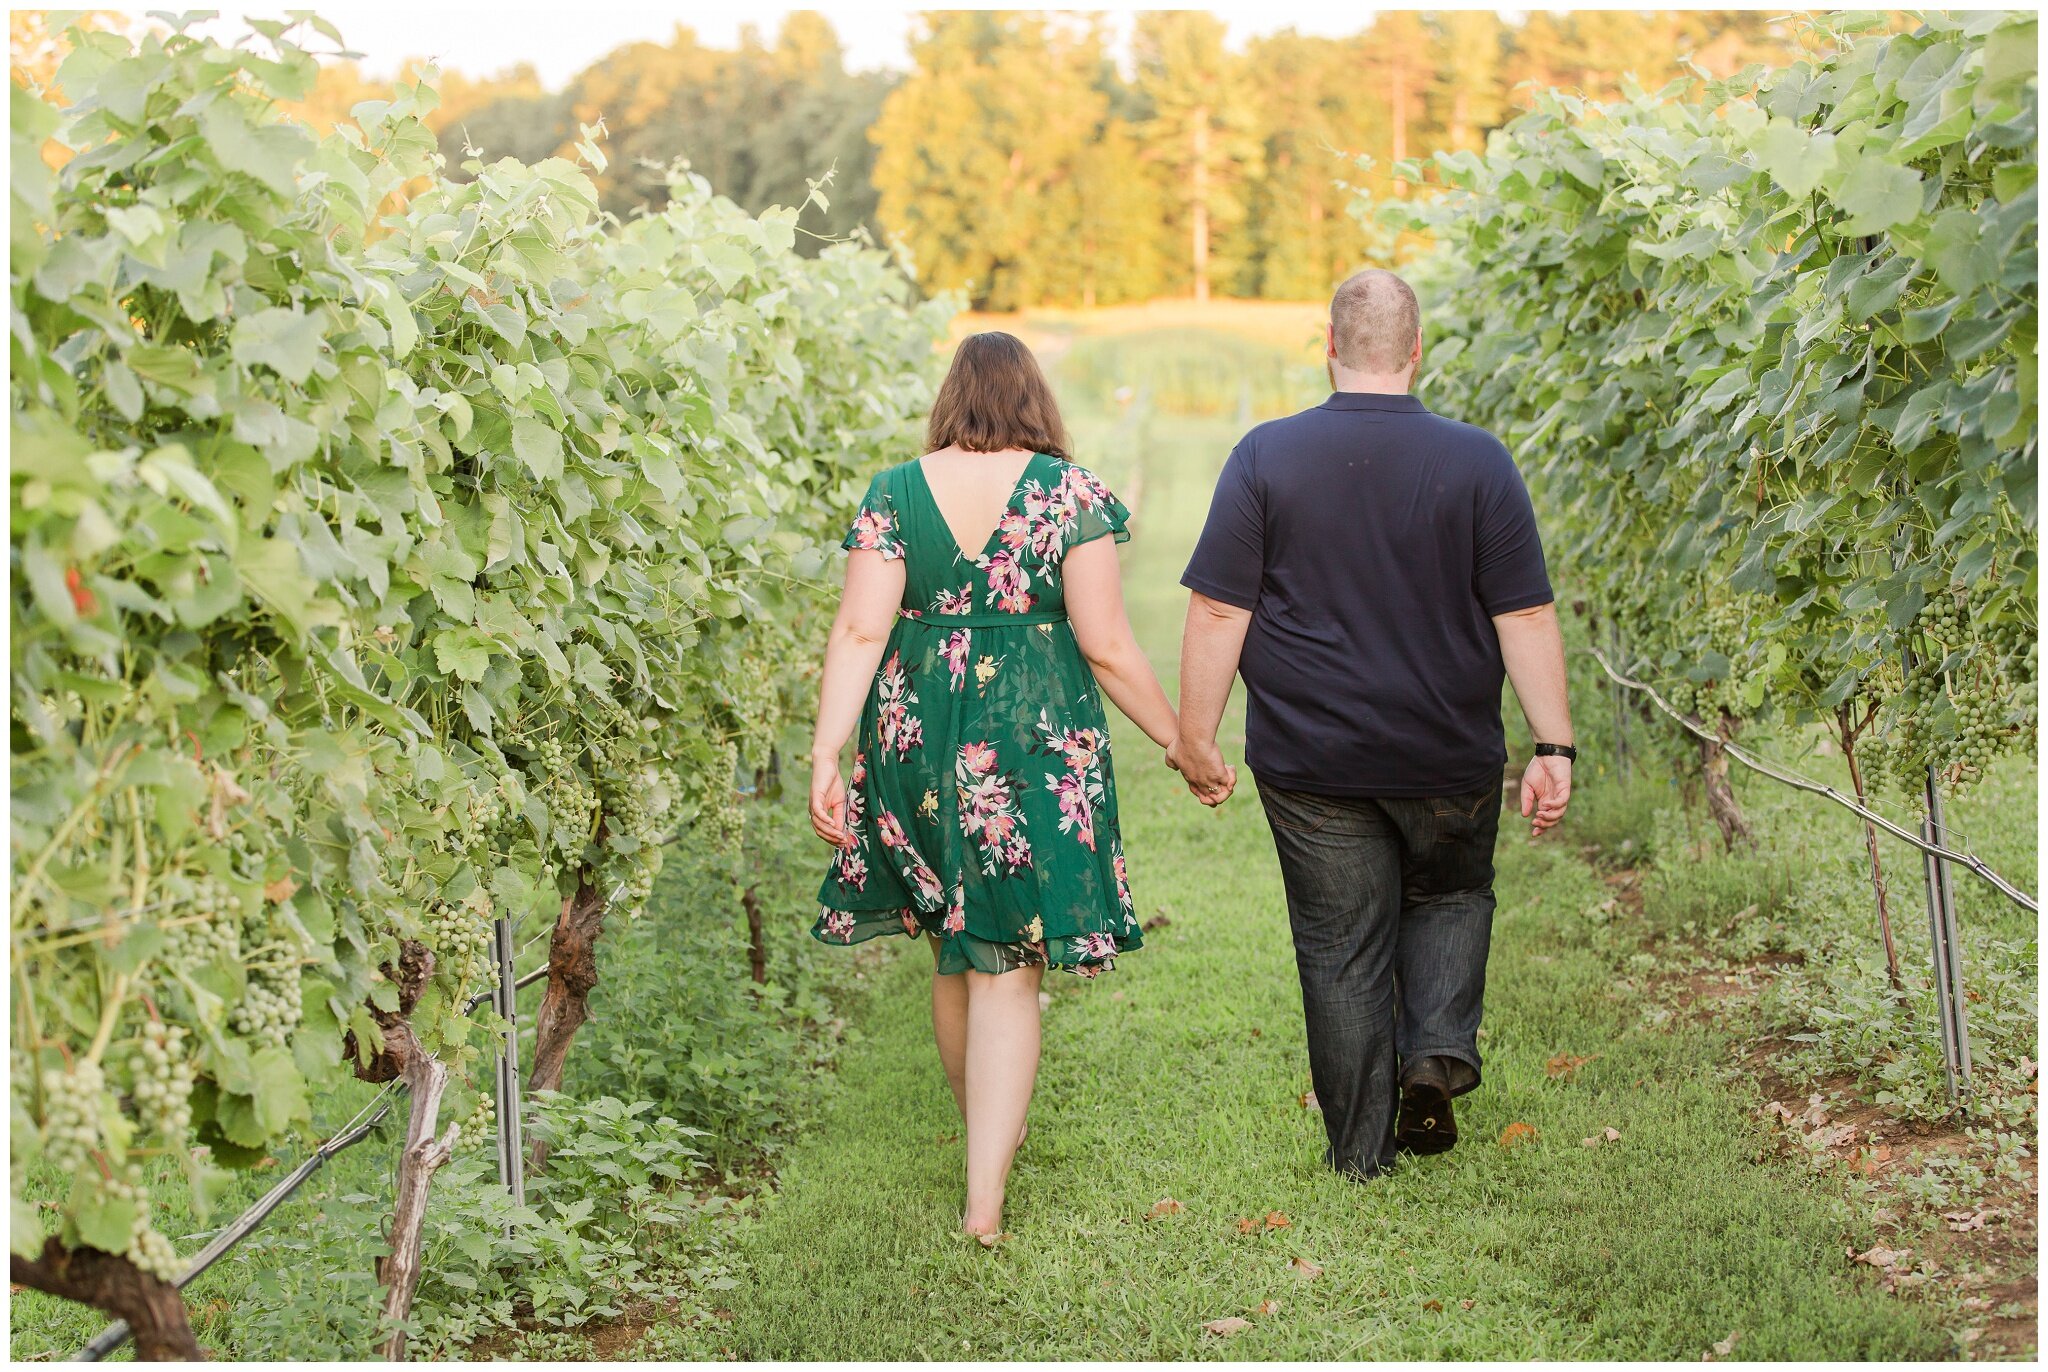 New Hampshire engagement session in a vineyard / distillery